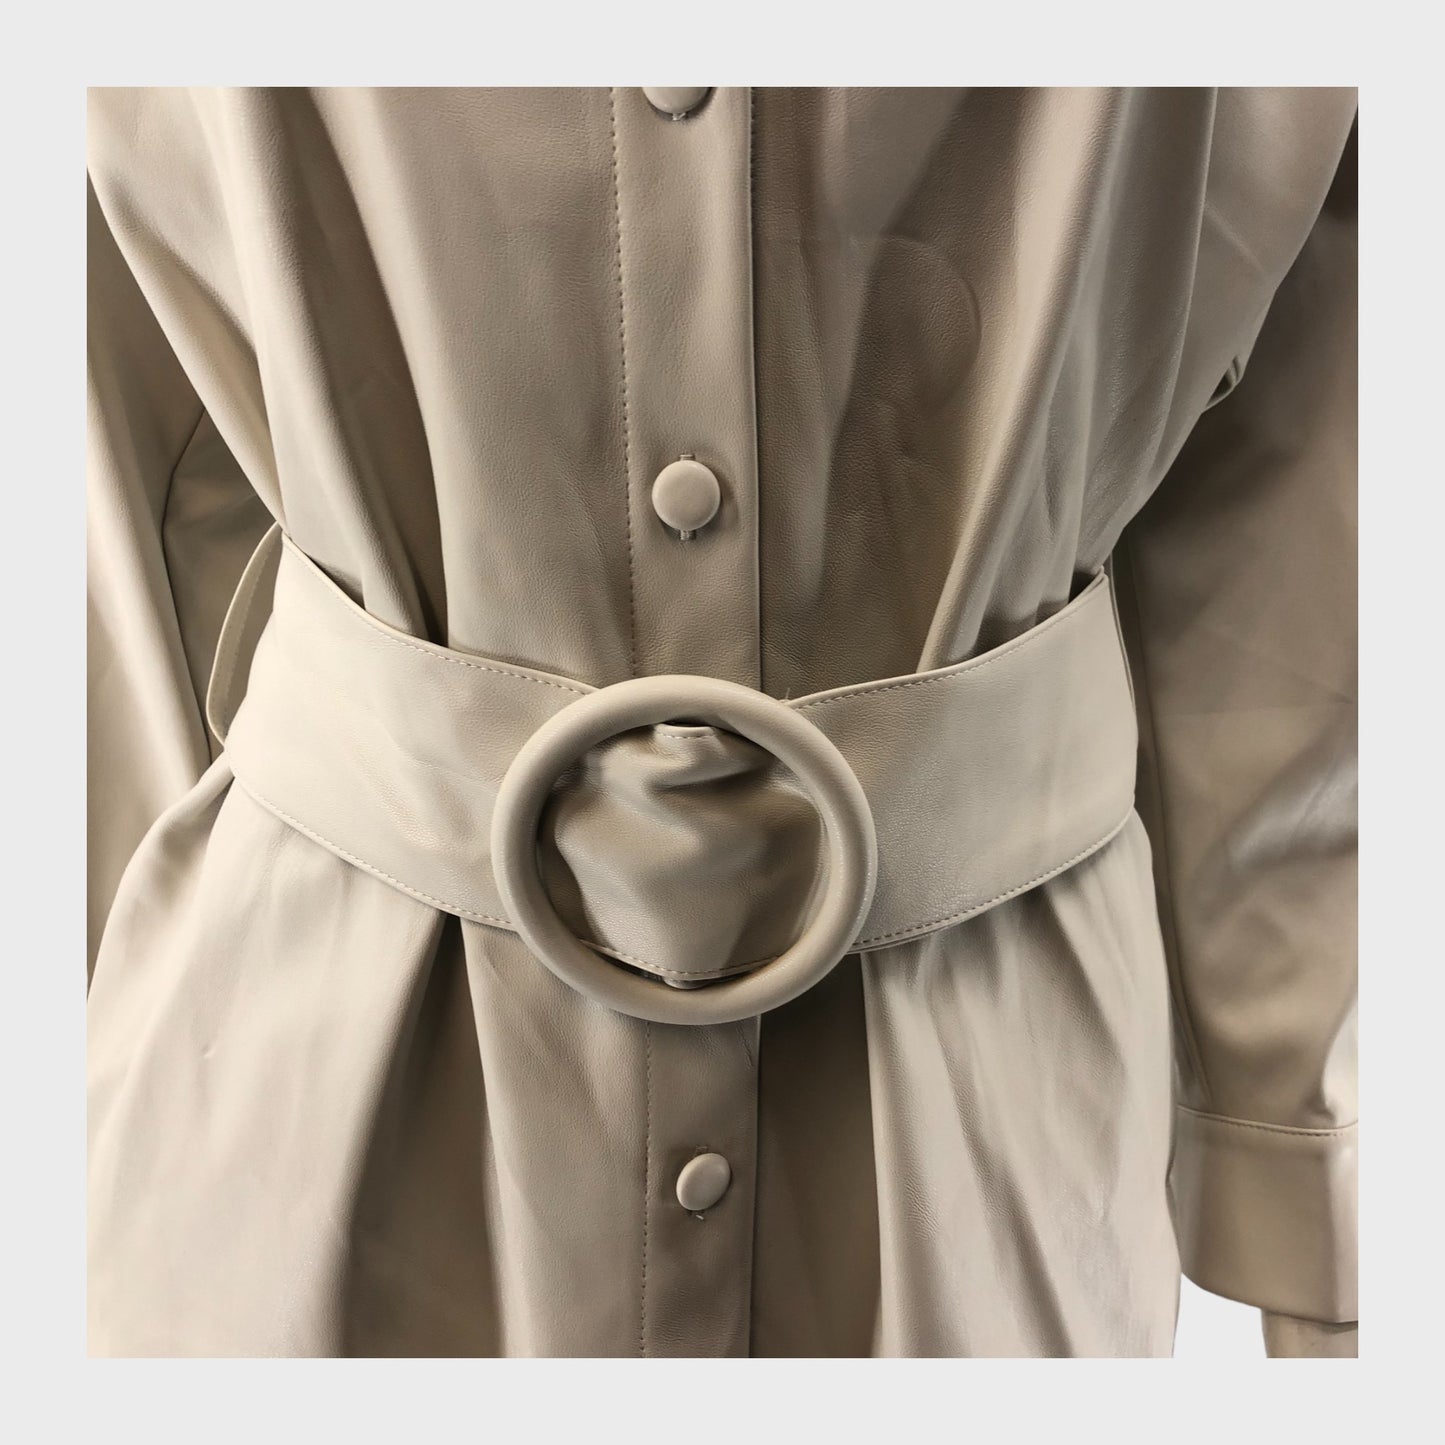 Beige Faux Leather Belted Shirt Dress